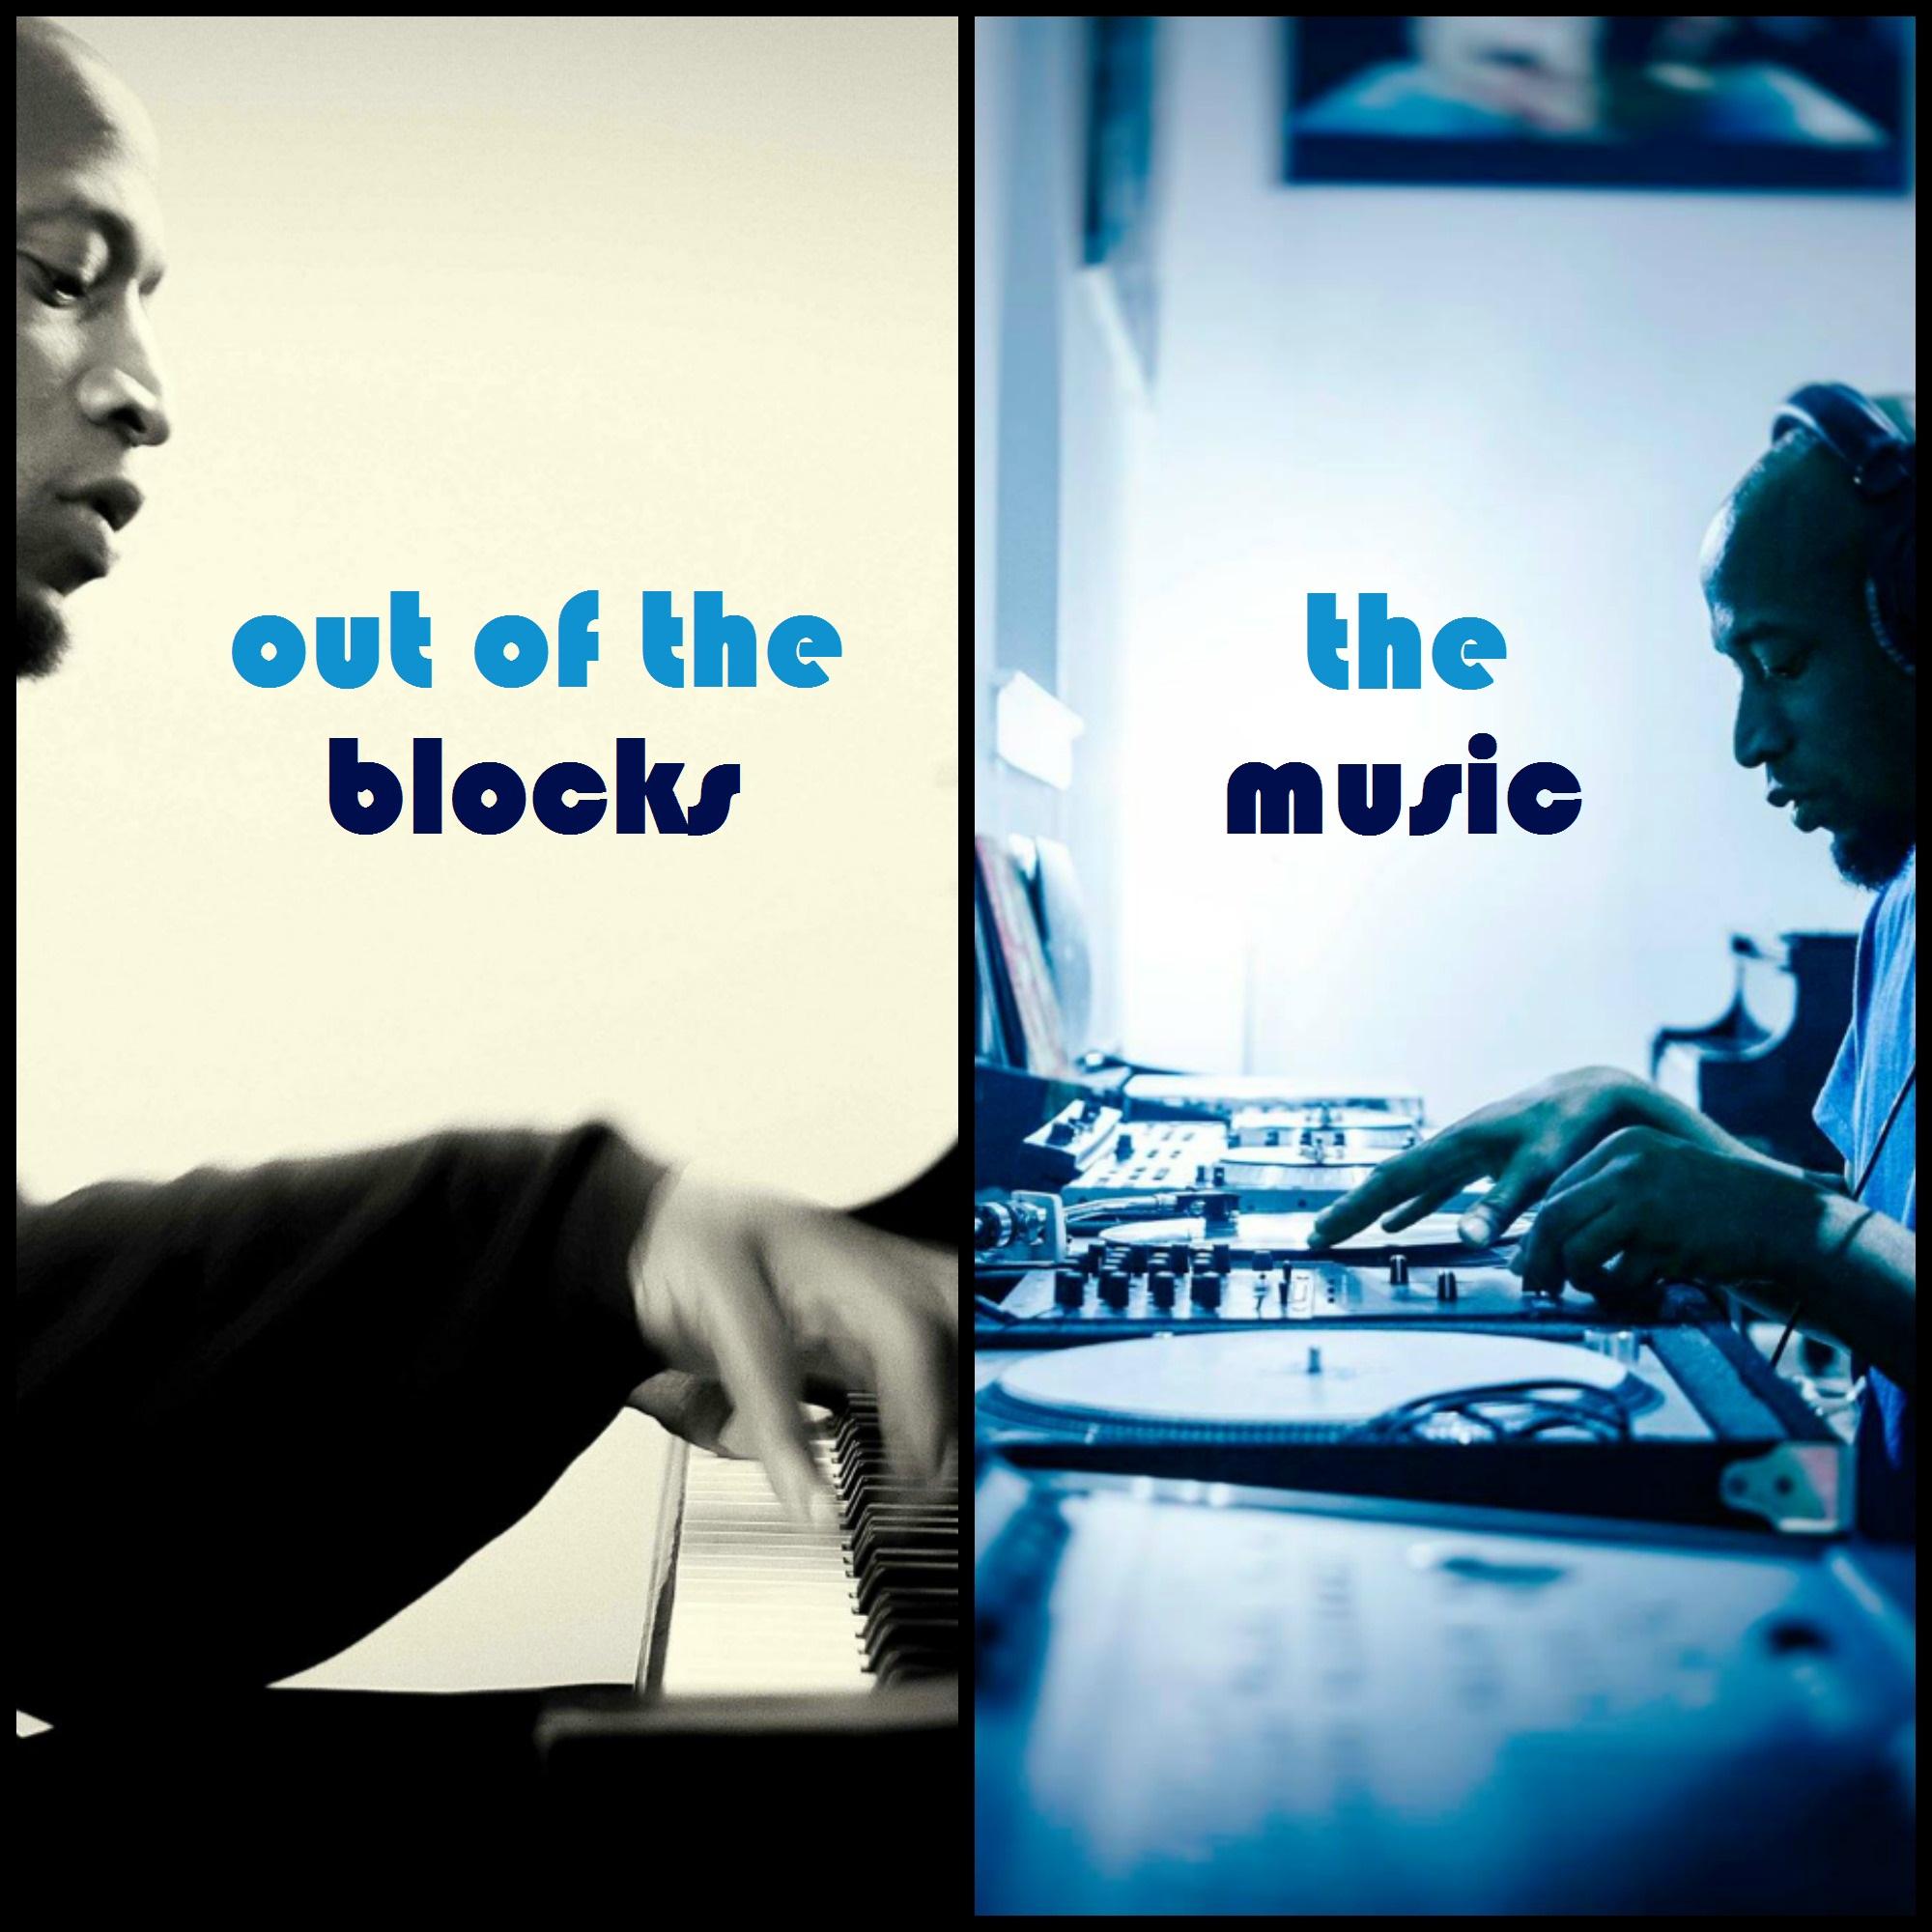 Thumbnail for "The Music of Out of the Blocks".